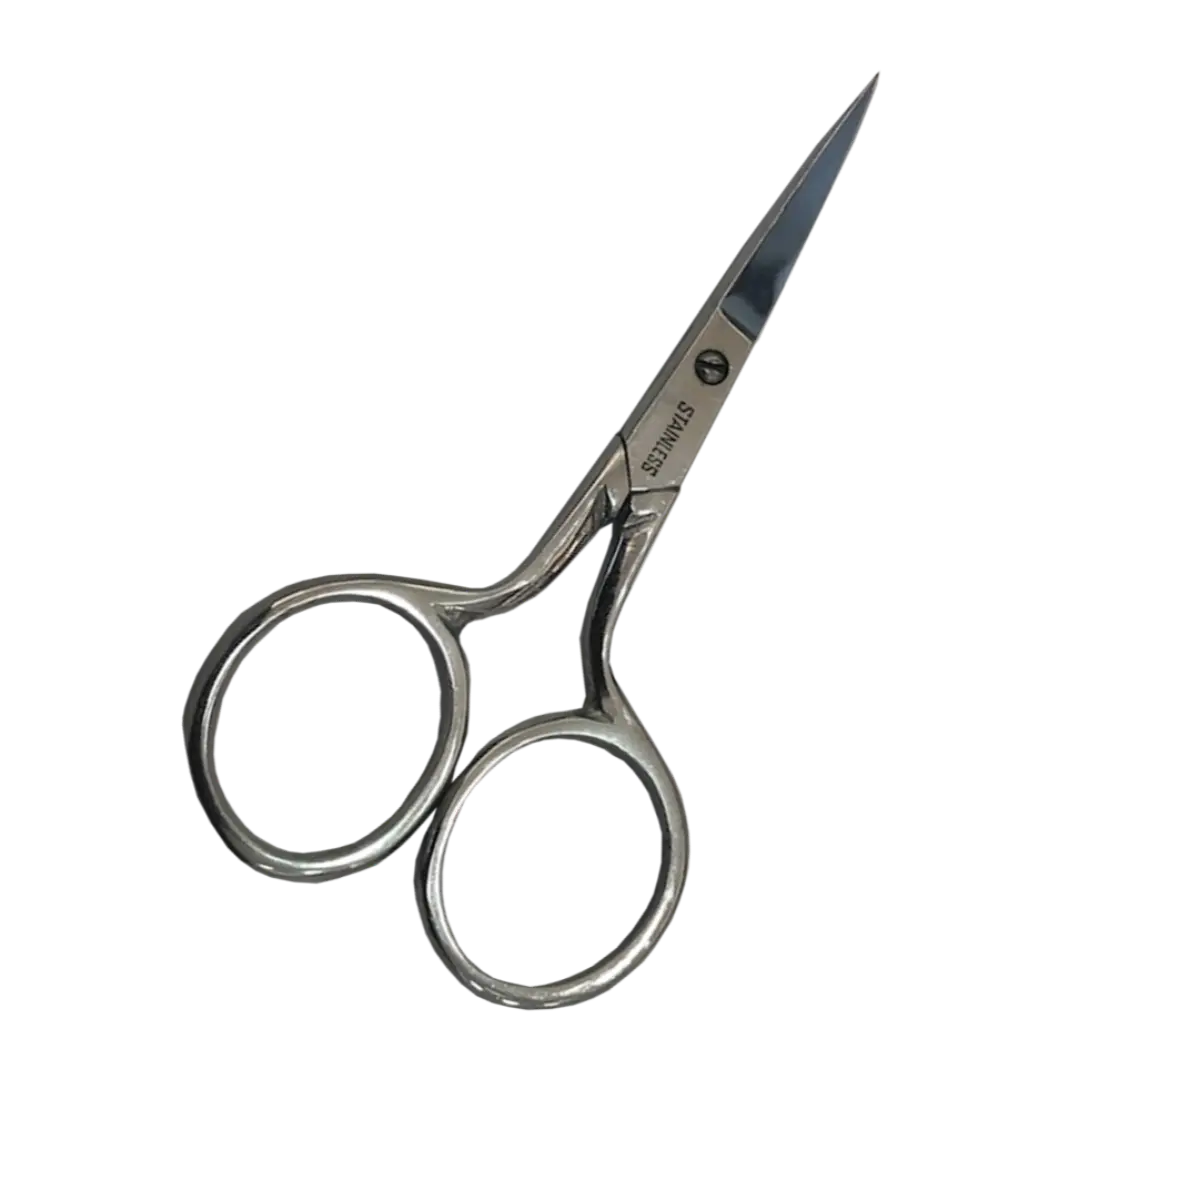 Fine Point Embroidery Craft Scissors By Janome